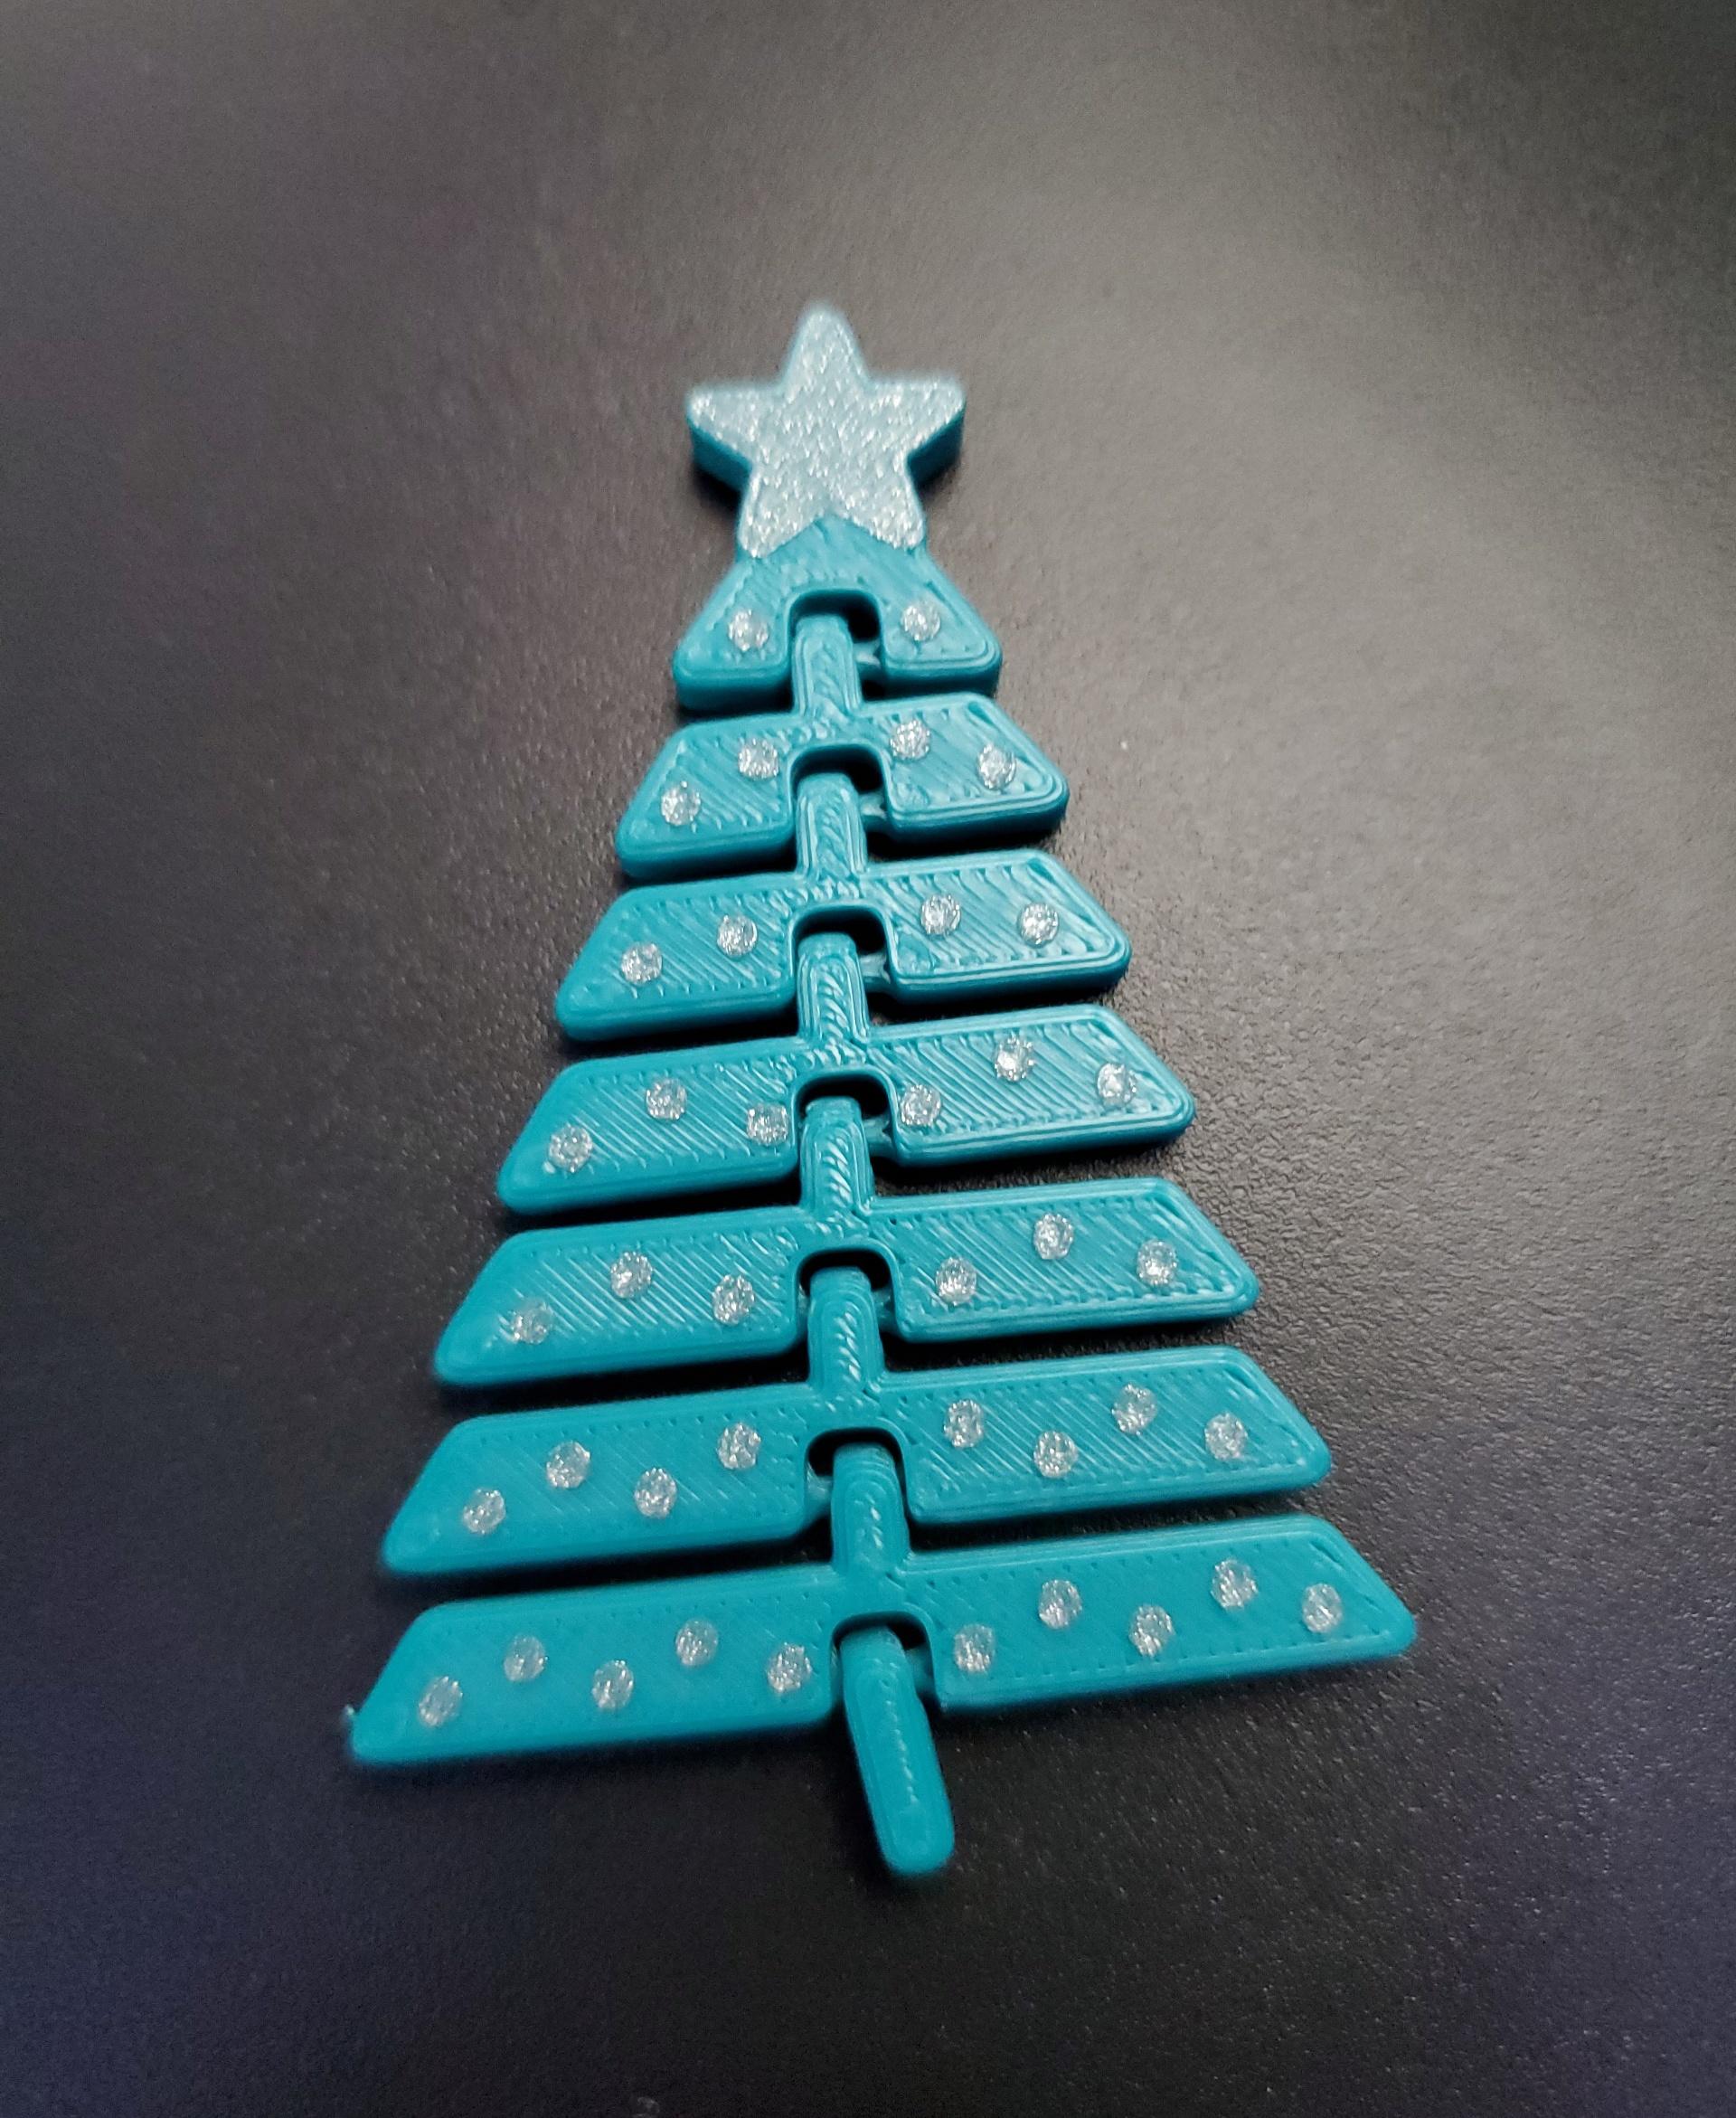 Articulated Christmas Tree with Star and Ornaments - Print in place fidget toys - 3mf - sliceworx ocean cyan - 3d model